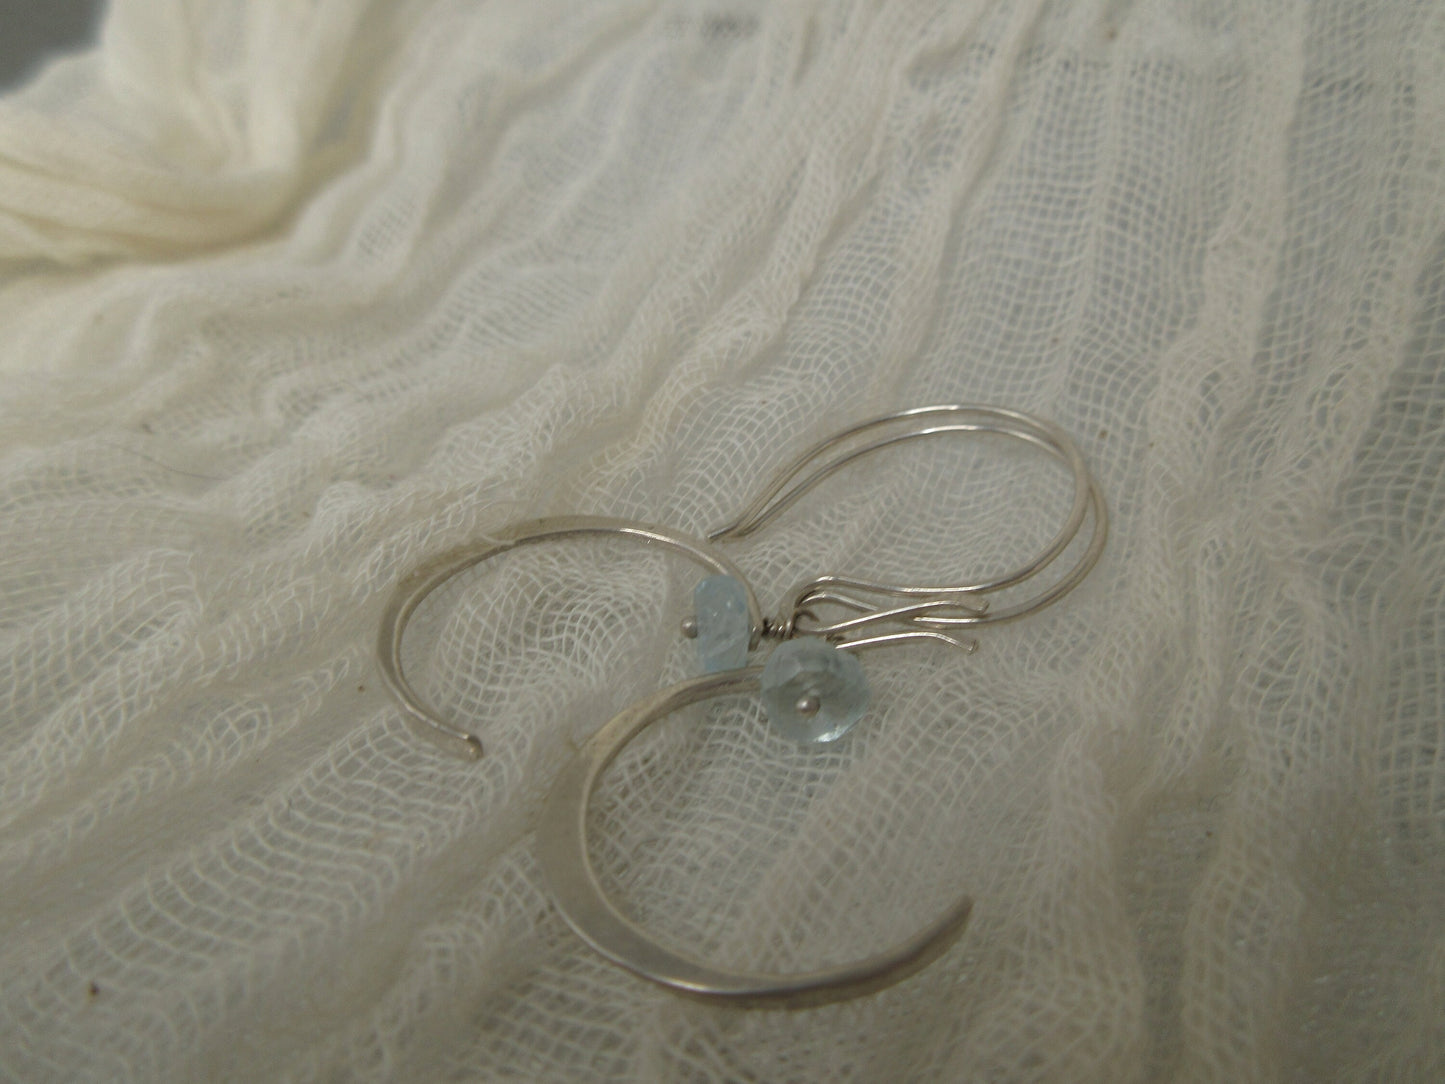 New Moon earrings in aquamarine and argentium sterling silver